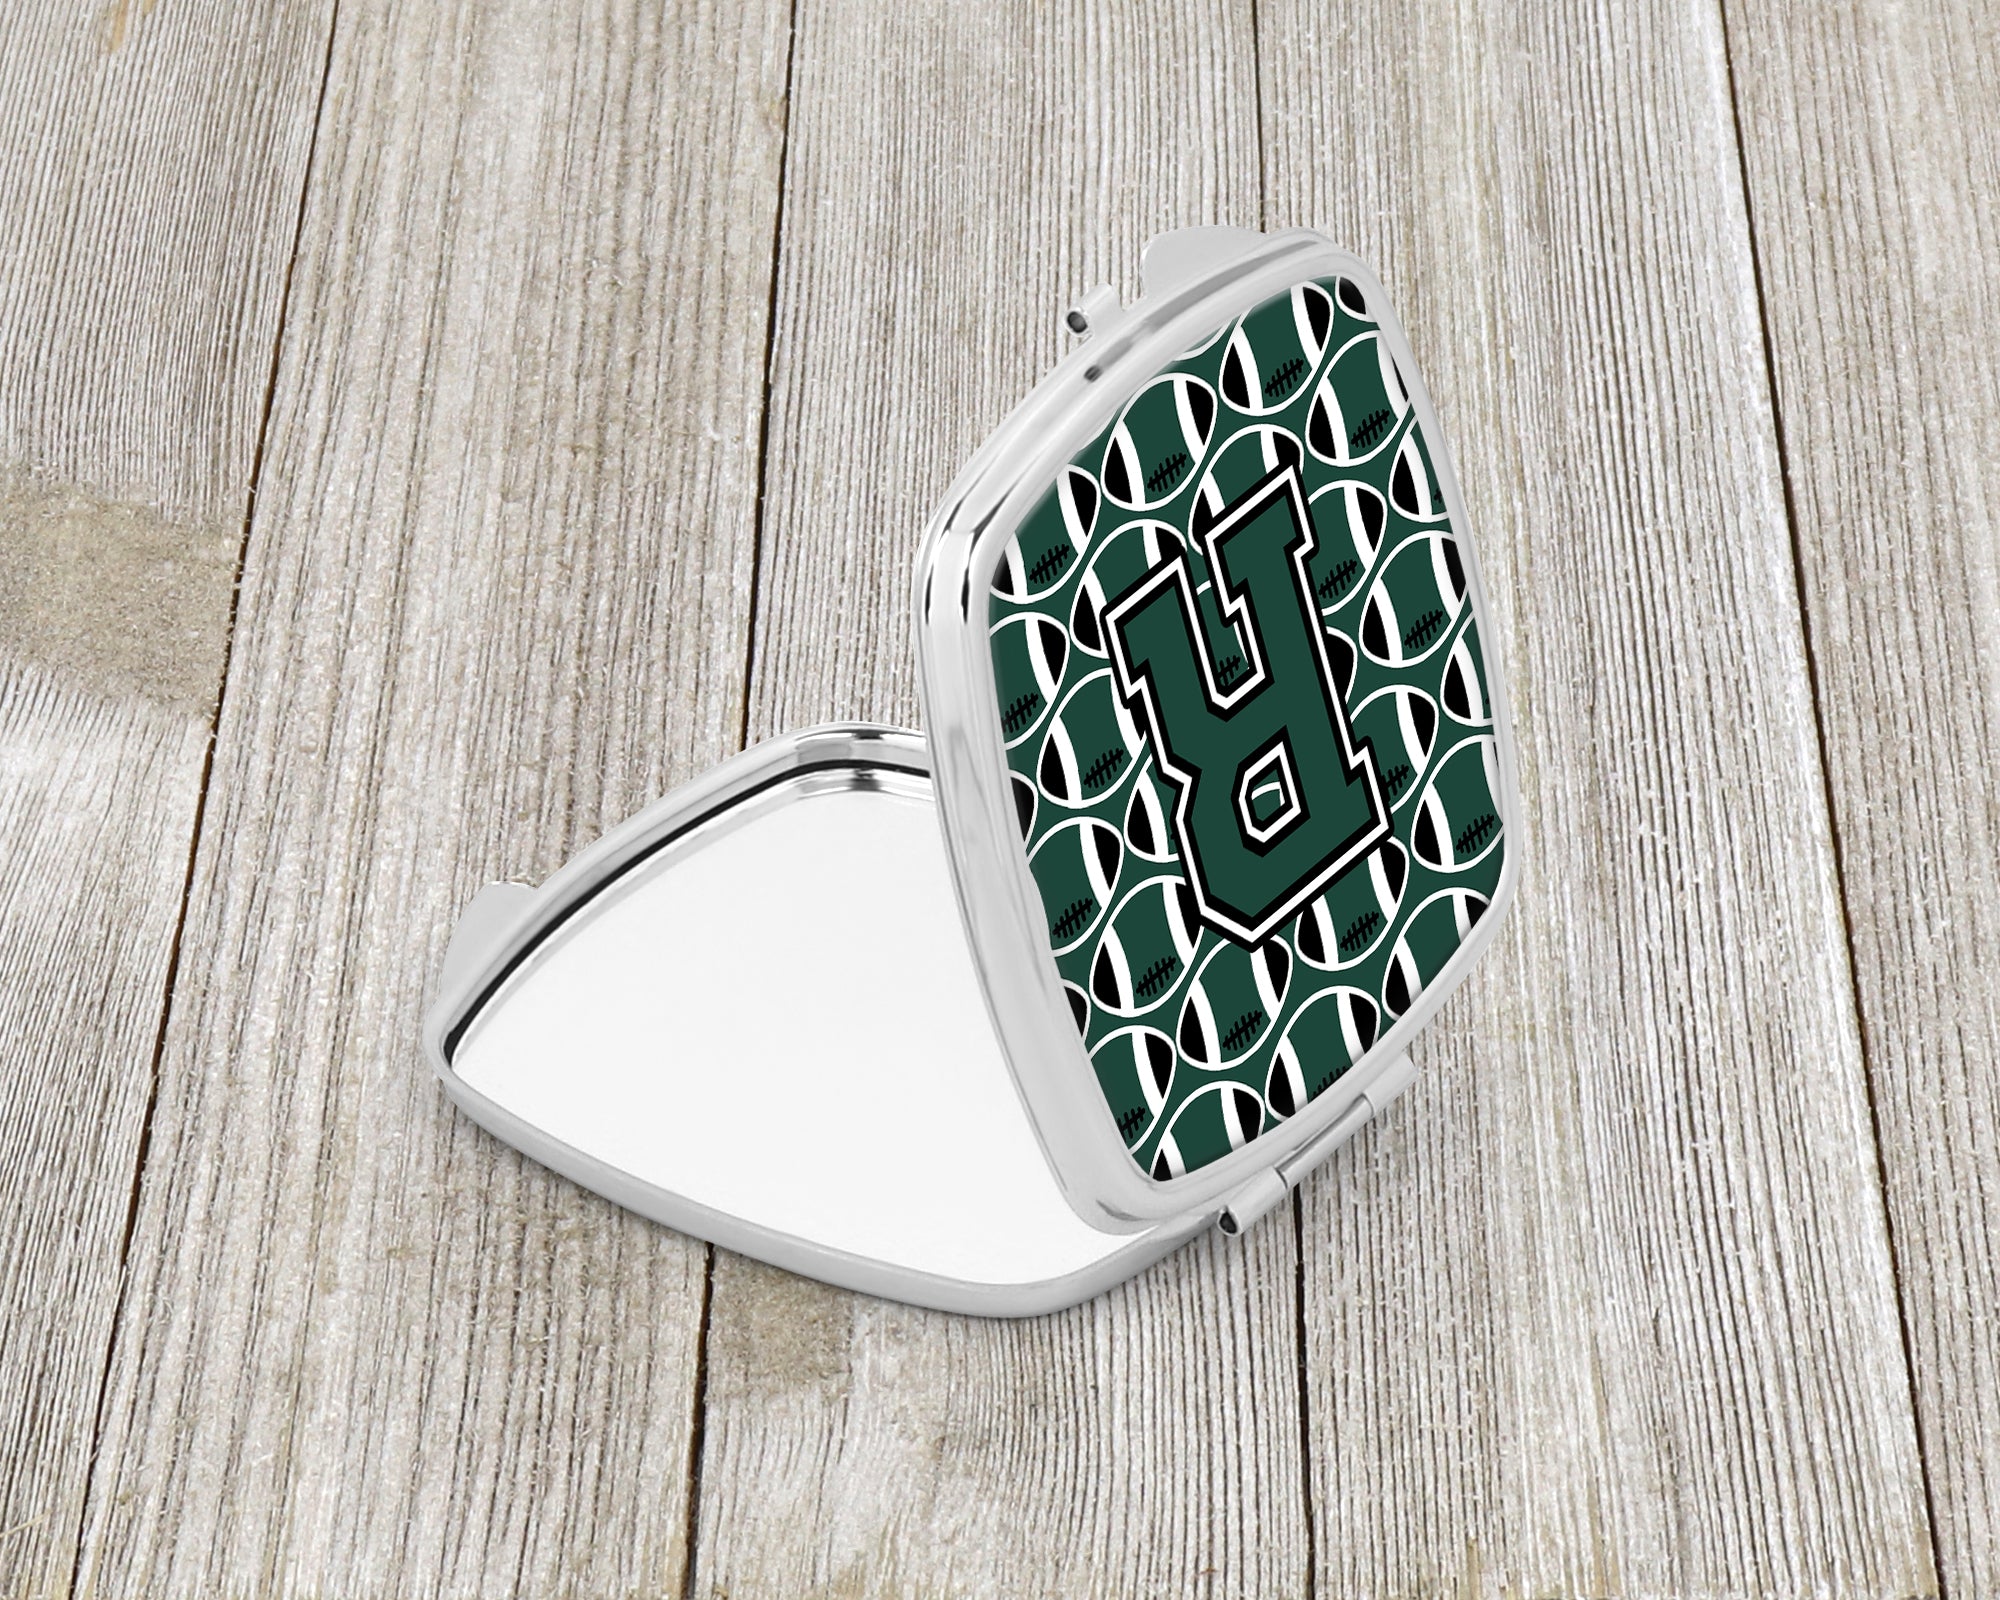 Letter R Football Green and White Compact Mirror CJ1071-RSCM